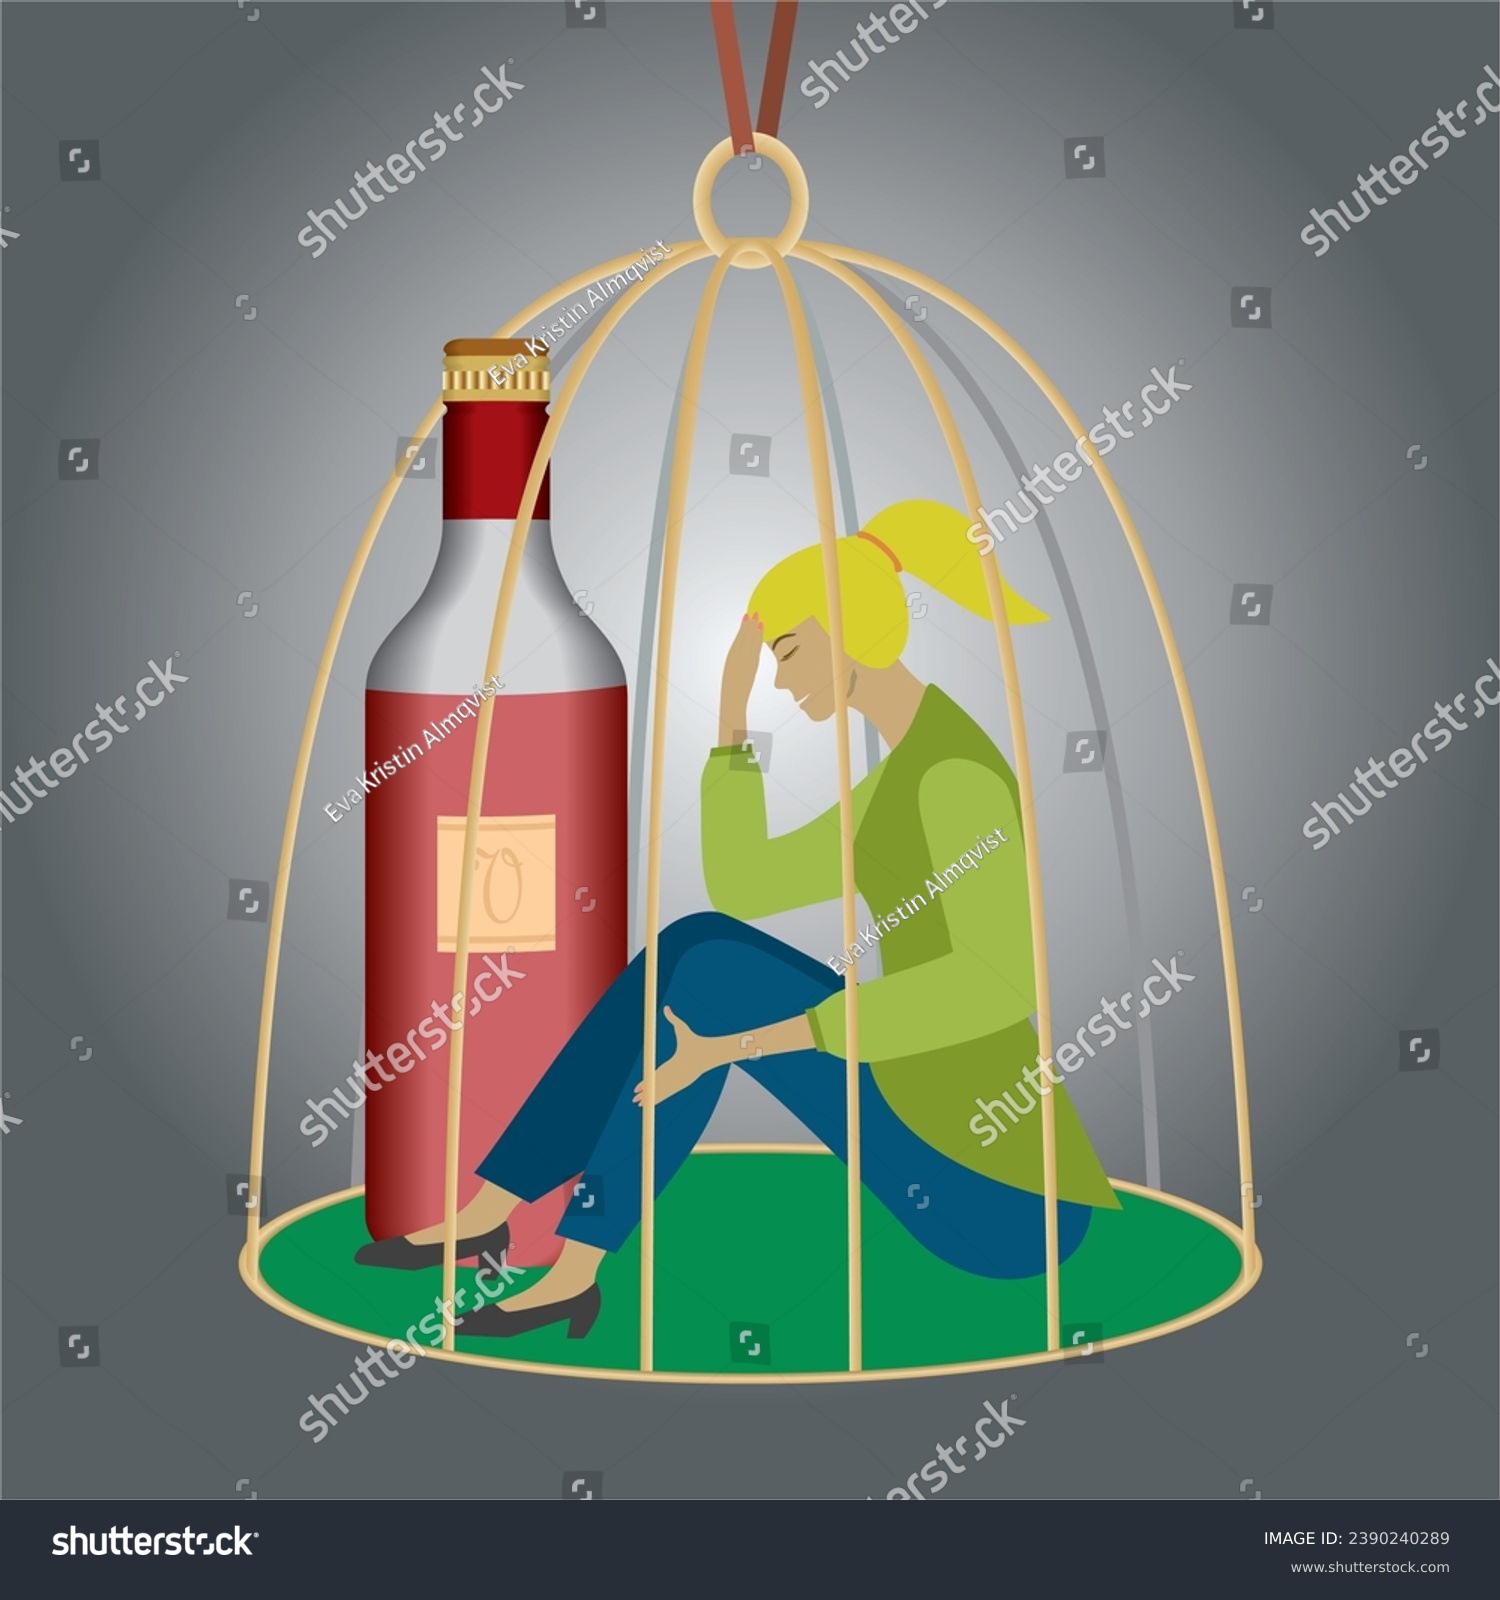 SVG of Woman trapped with alcohol abuse in a cage. Square composition. Vector illustration. svg